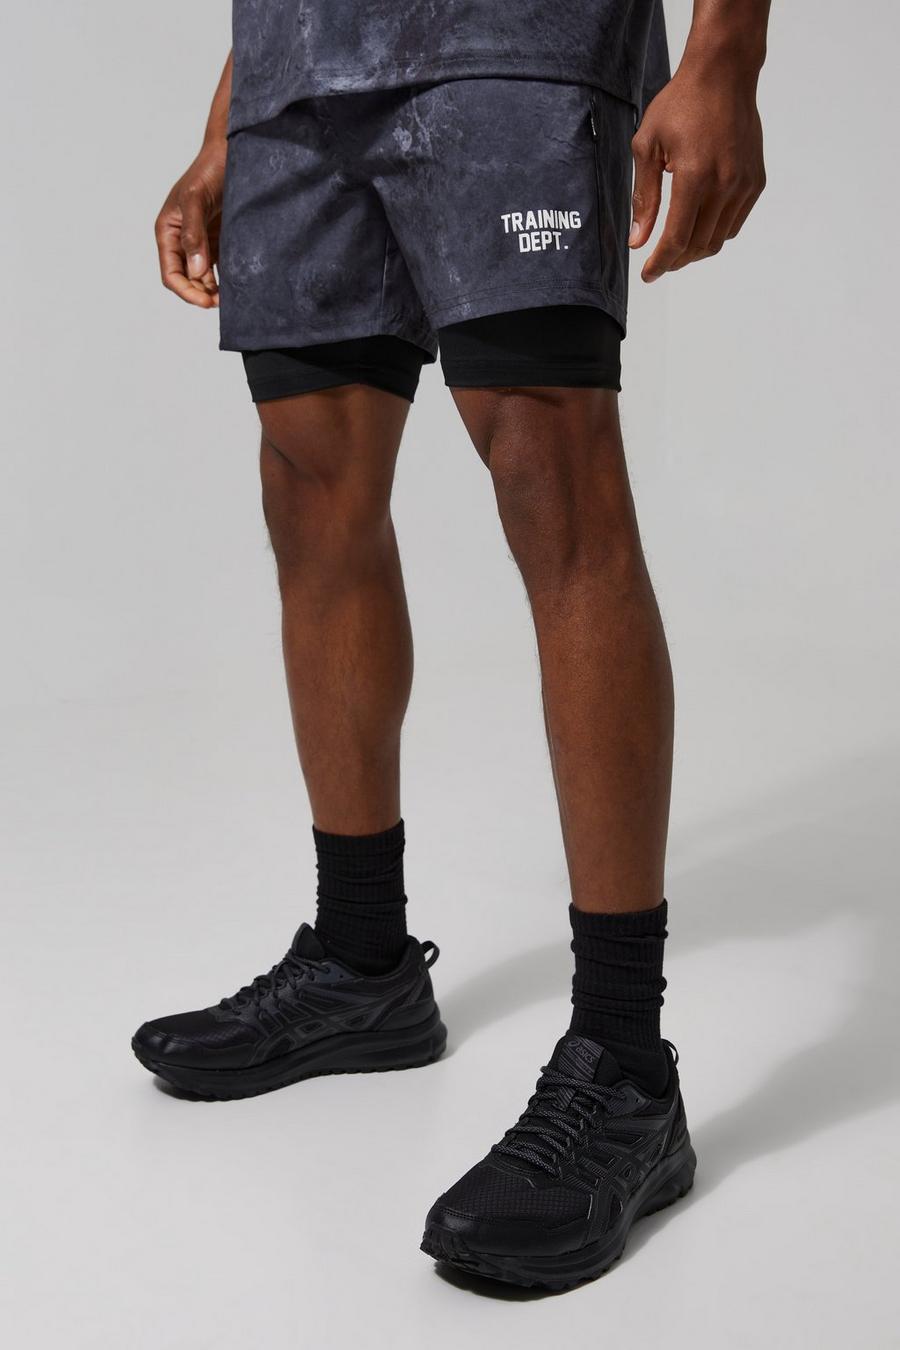 Black Man Active Training Dept 2-in-1 Camo Shorts image number 1